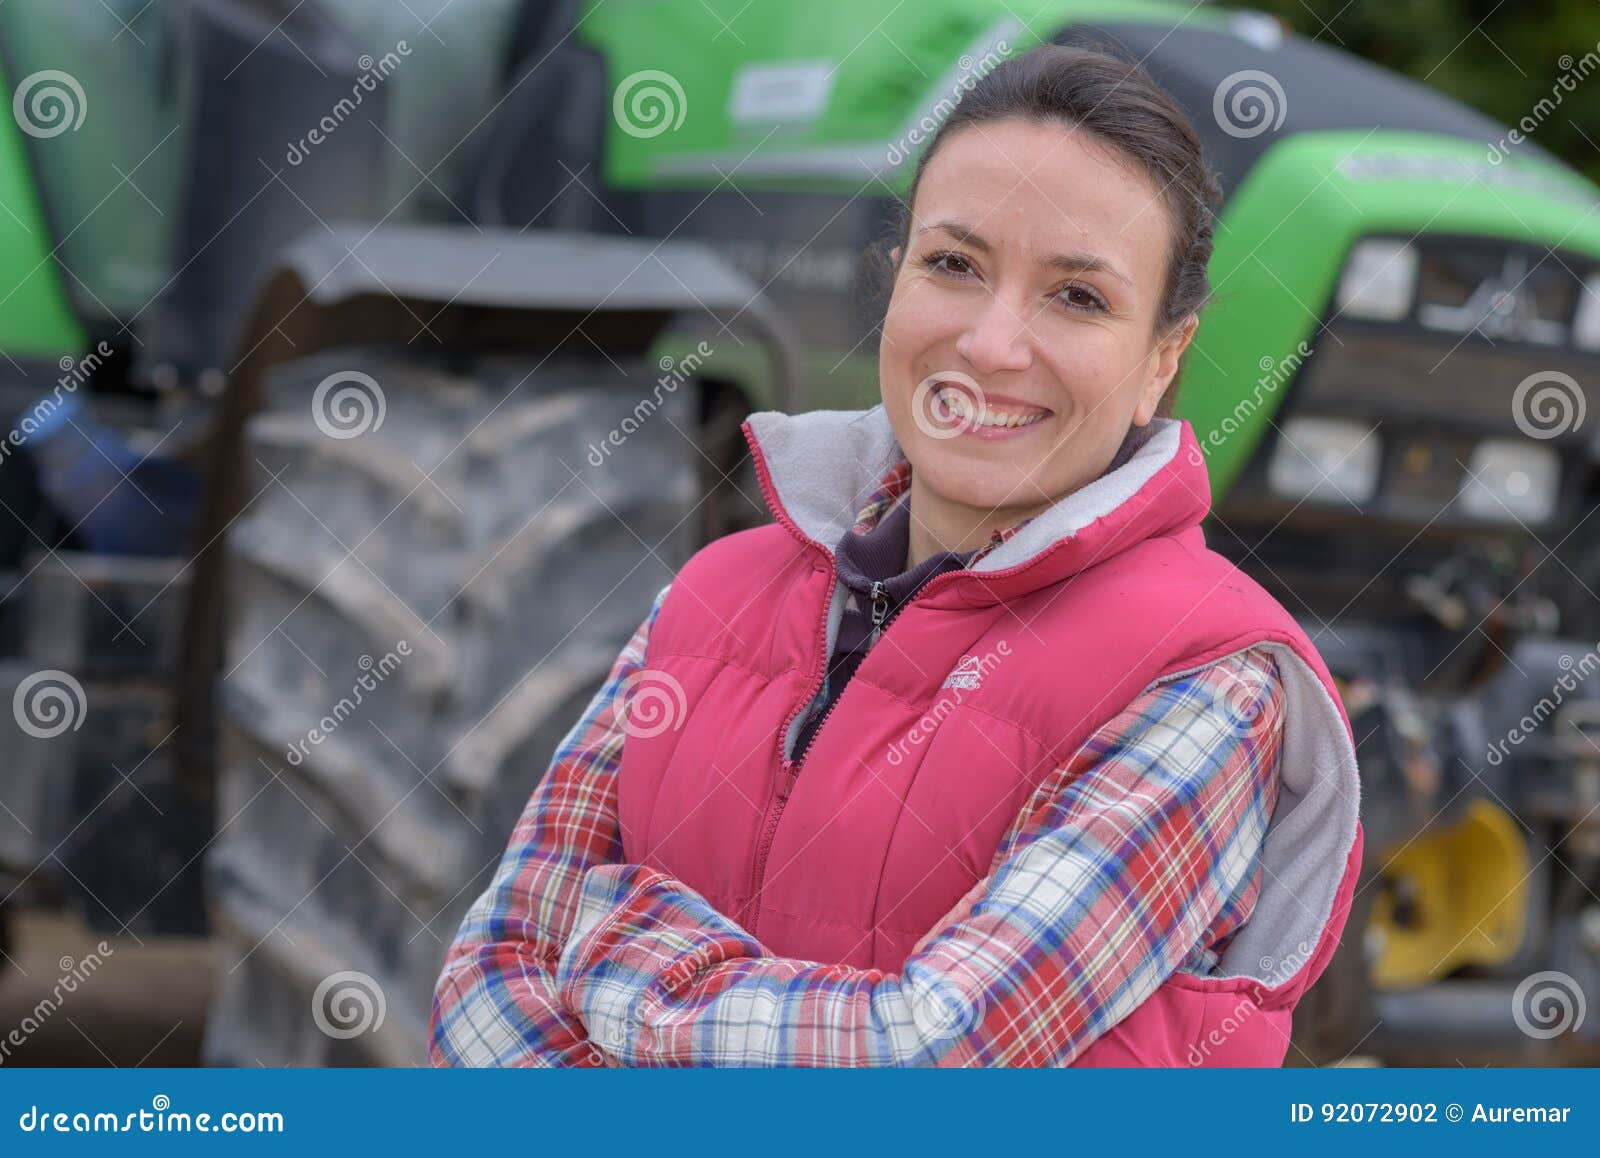 young female agricultor on field tractor in background